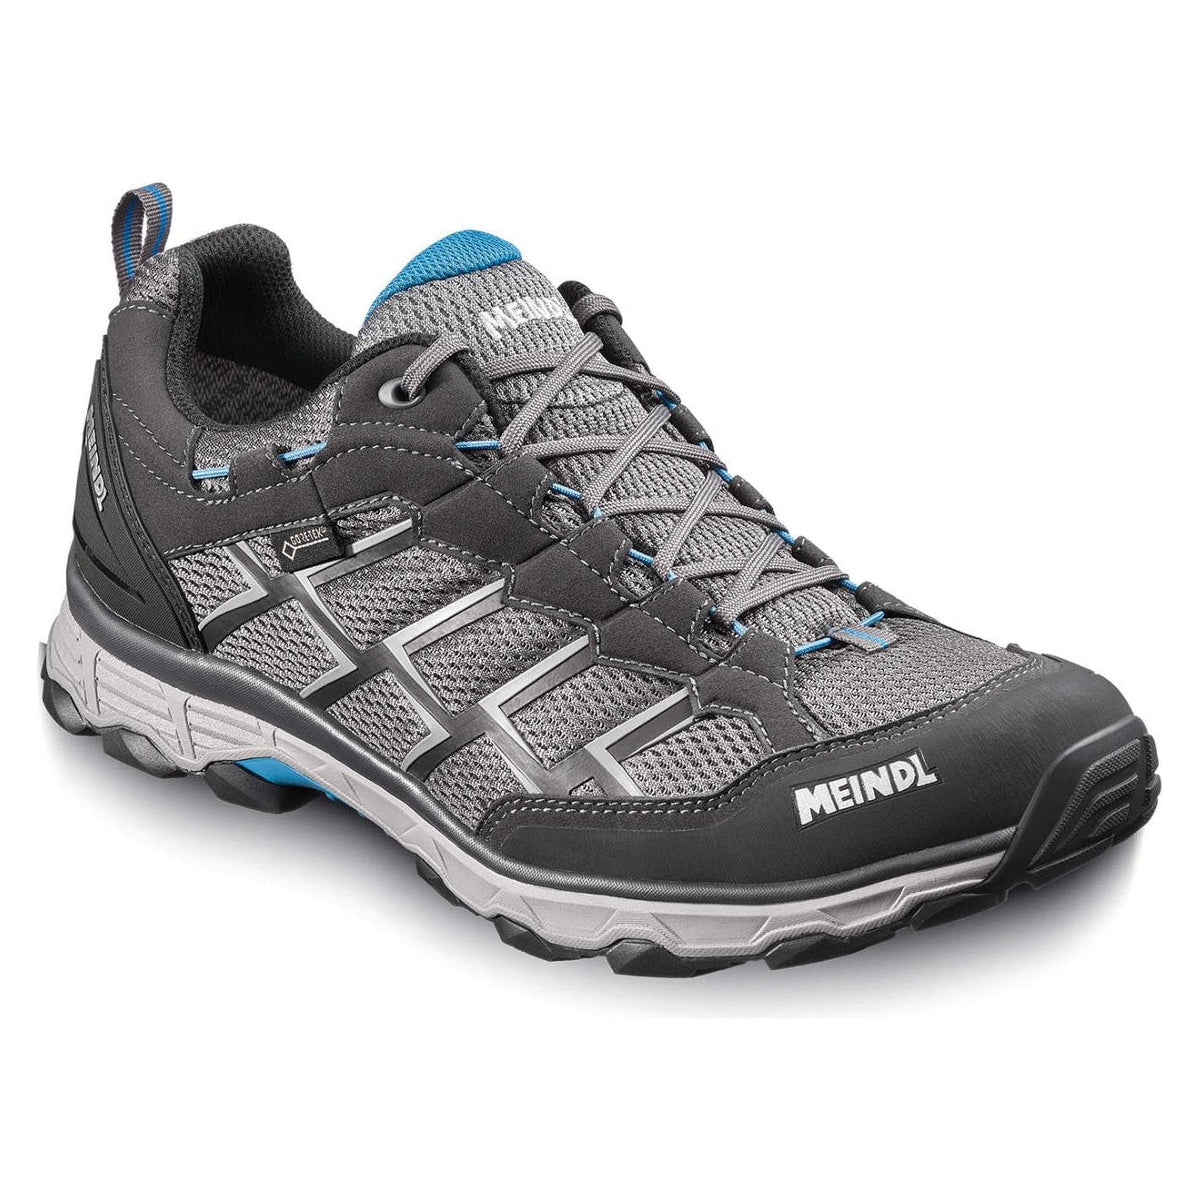 Meindl Activo GTX Wide Fit Walking Shoes - Anthracite/Ocean